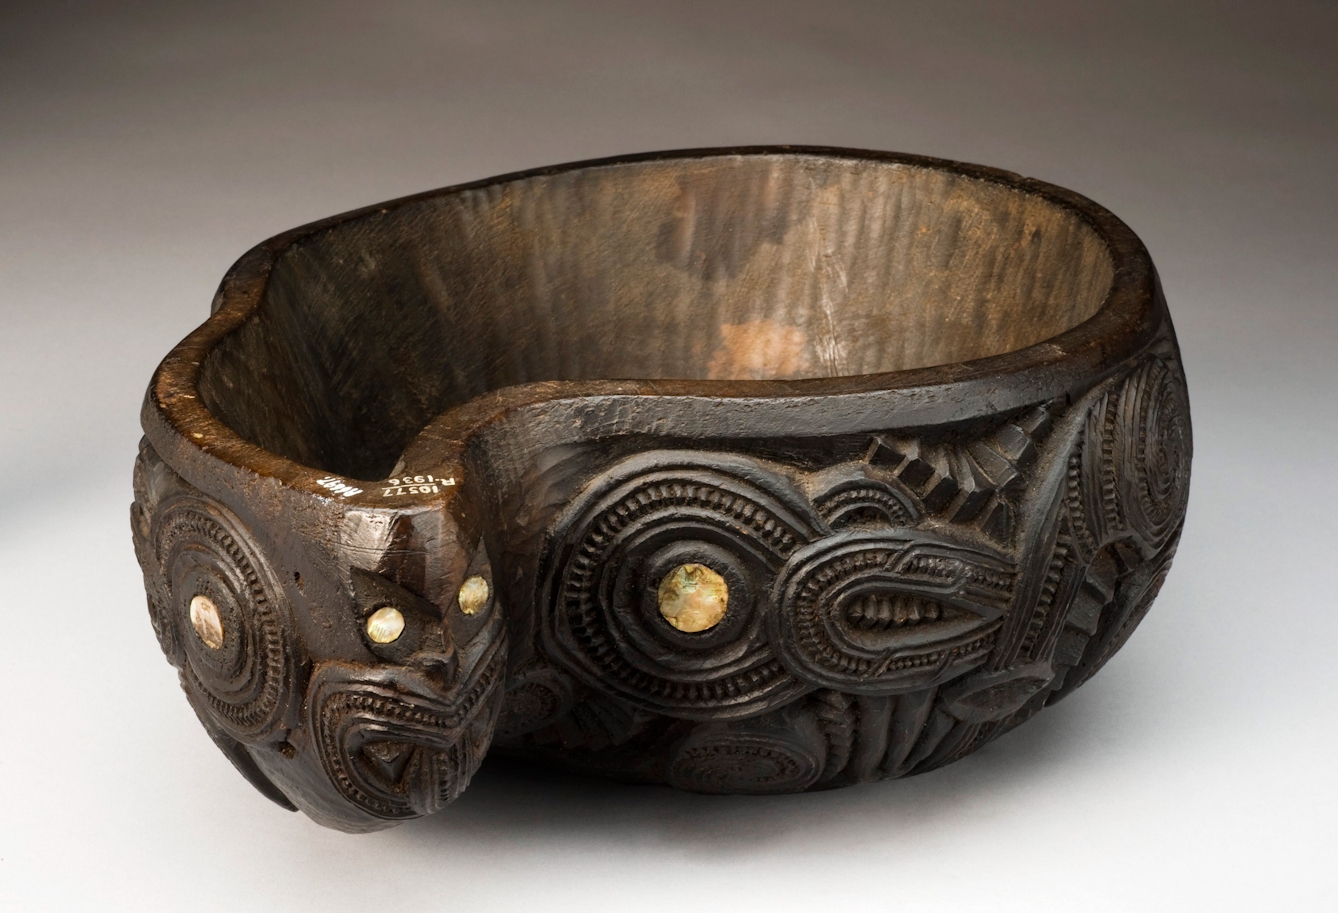 A photograph of a carved wooden bowl inset with abalone shell. The bowl is of New Zealand origin and shows traditional Maori overlapping animals and ancestral figures called Tiki.